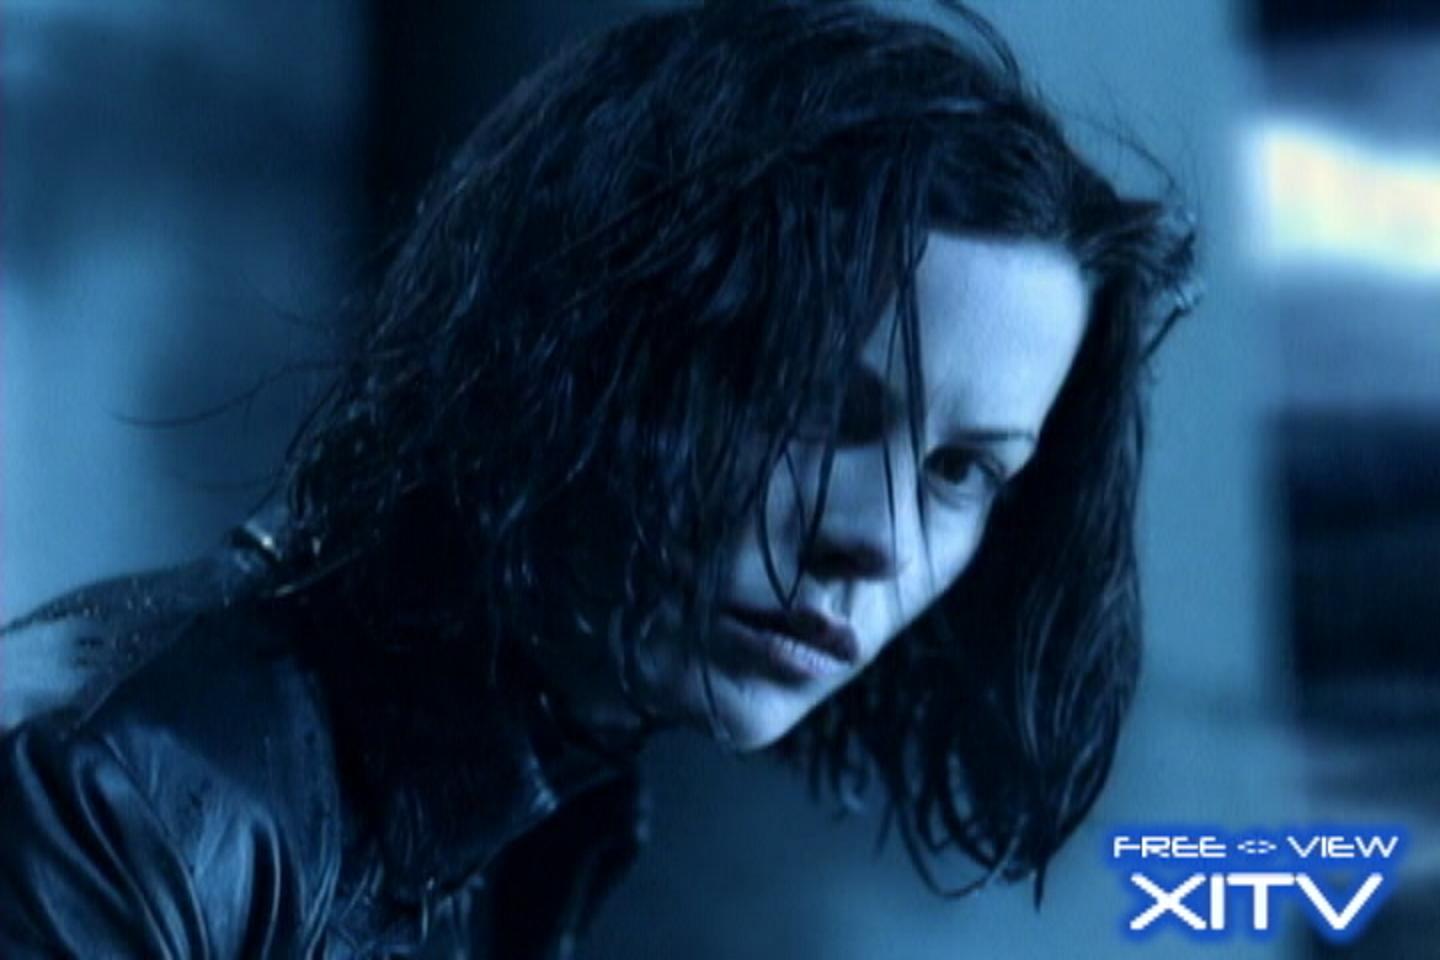 XITV FREE <> VIEW Underworld! Starring Kate Beckensale! XITV Is Must See TV!